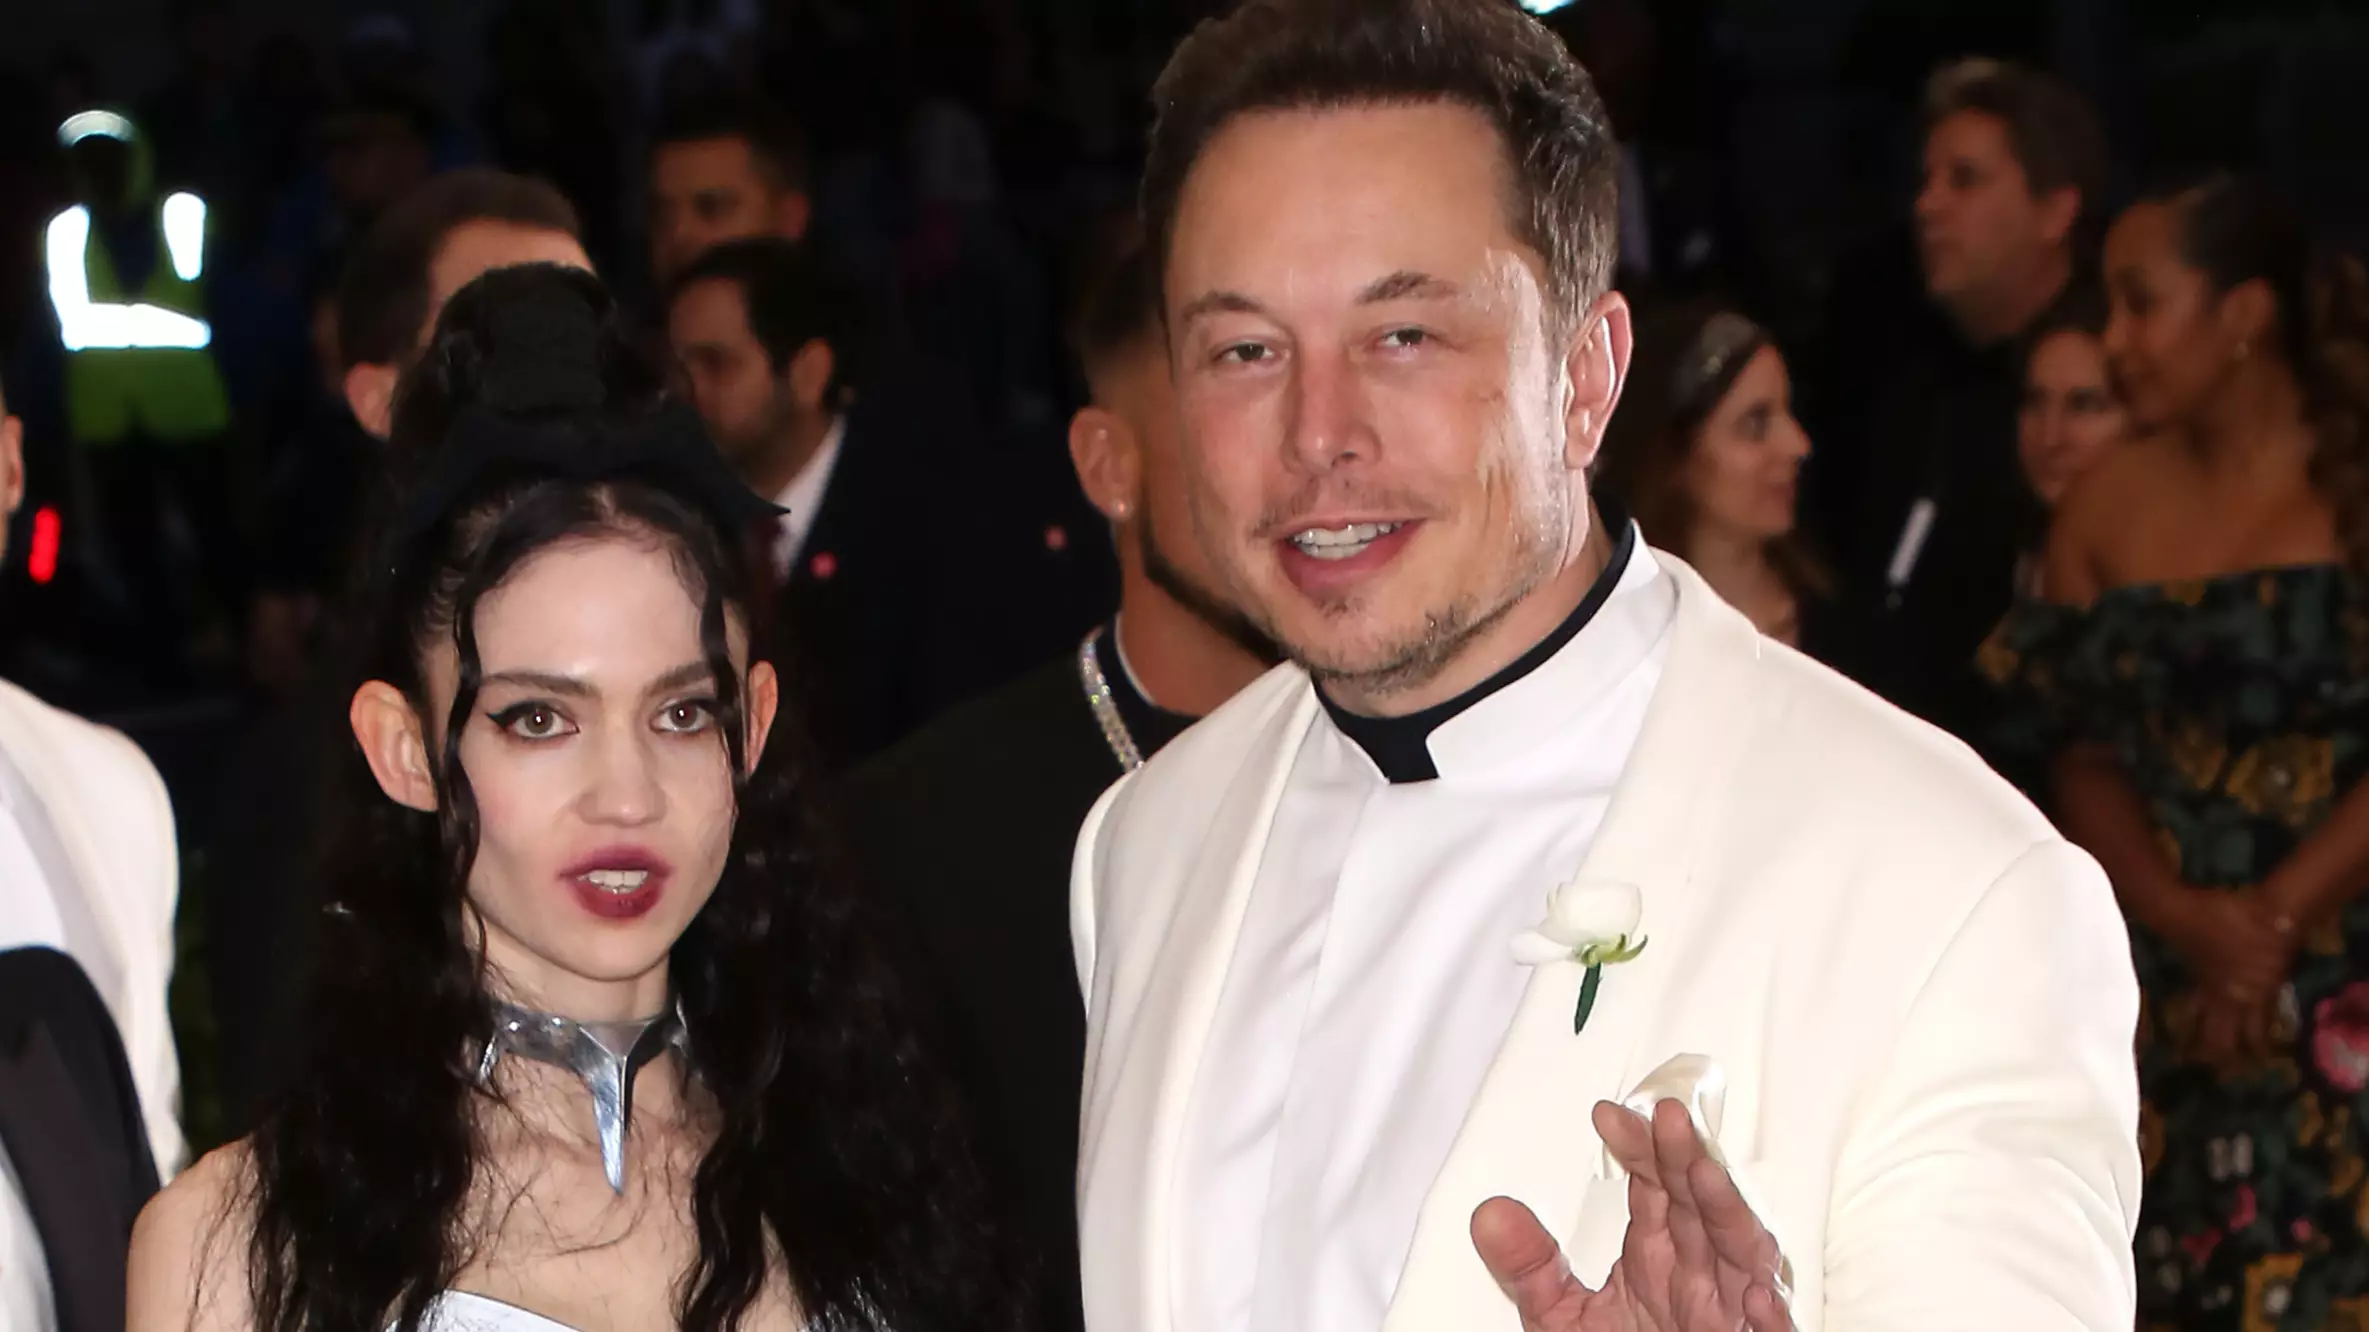 Californian Law Could Block Grimes And Elon Musk's Baby Name X Æ A-12